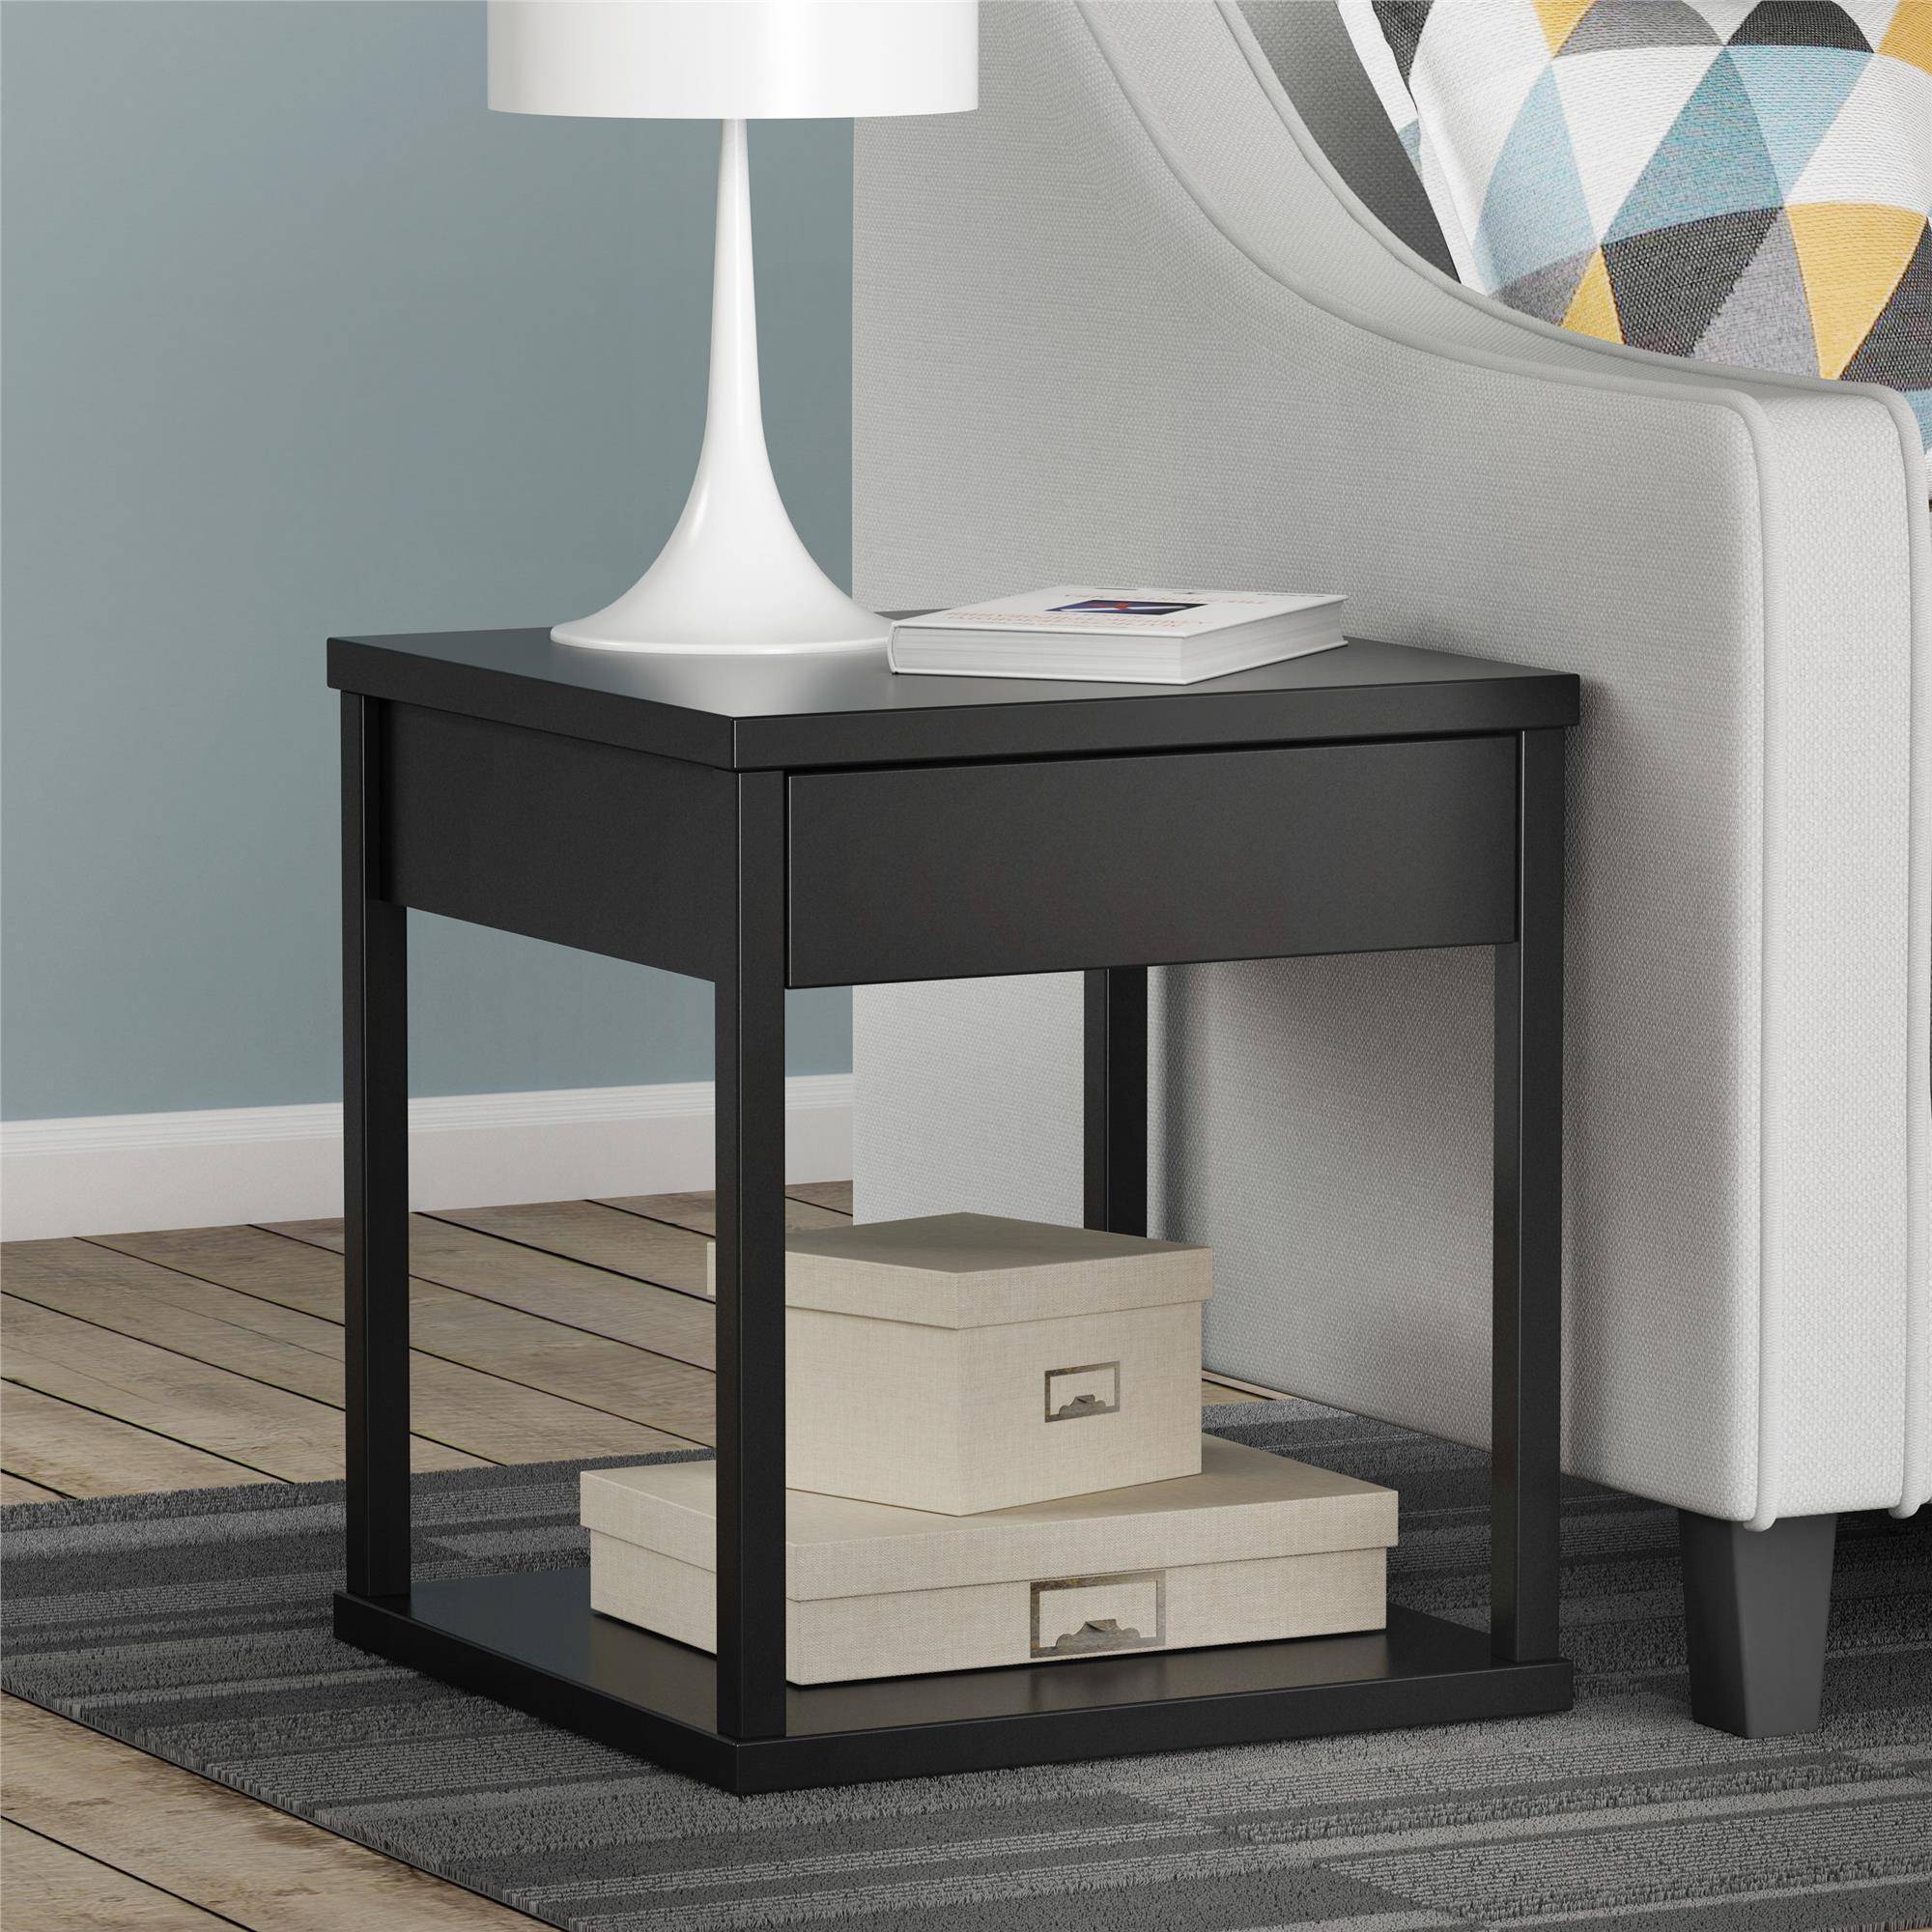 mainstays parsons end table with drawer multiple colors square accent bunching coffee tables silver runner and placemats seater dining grey patterned armchair plastic wicker side